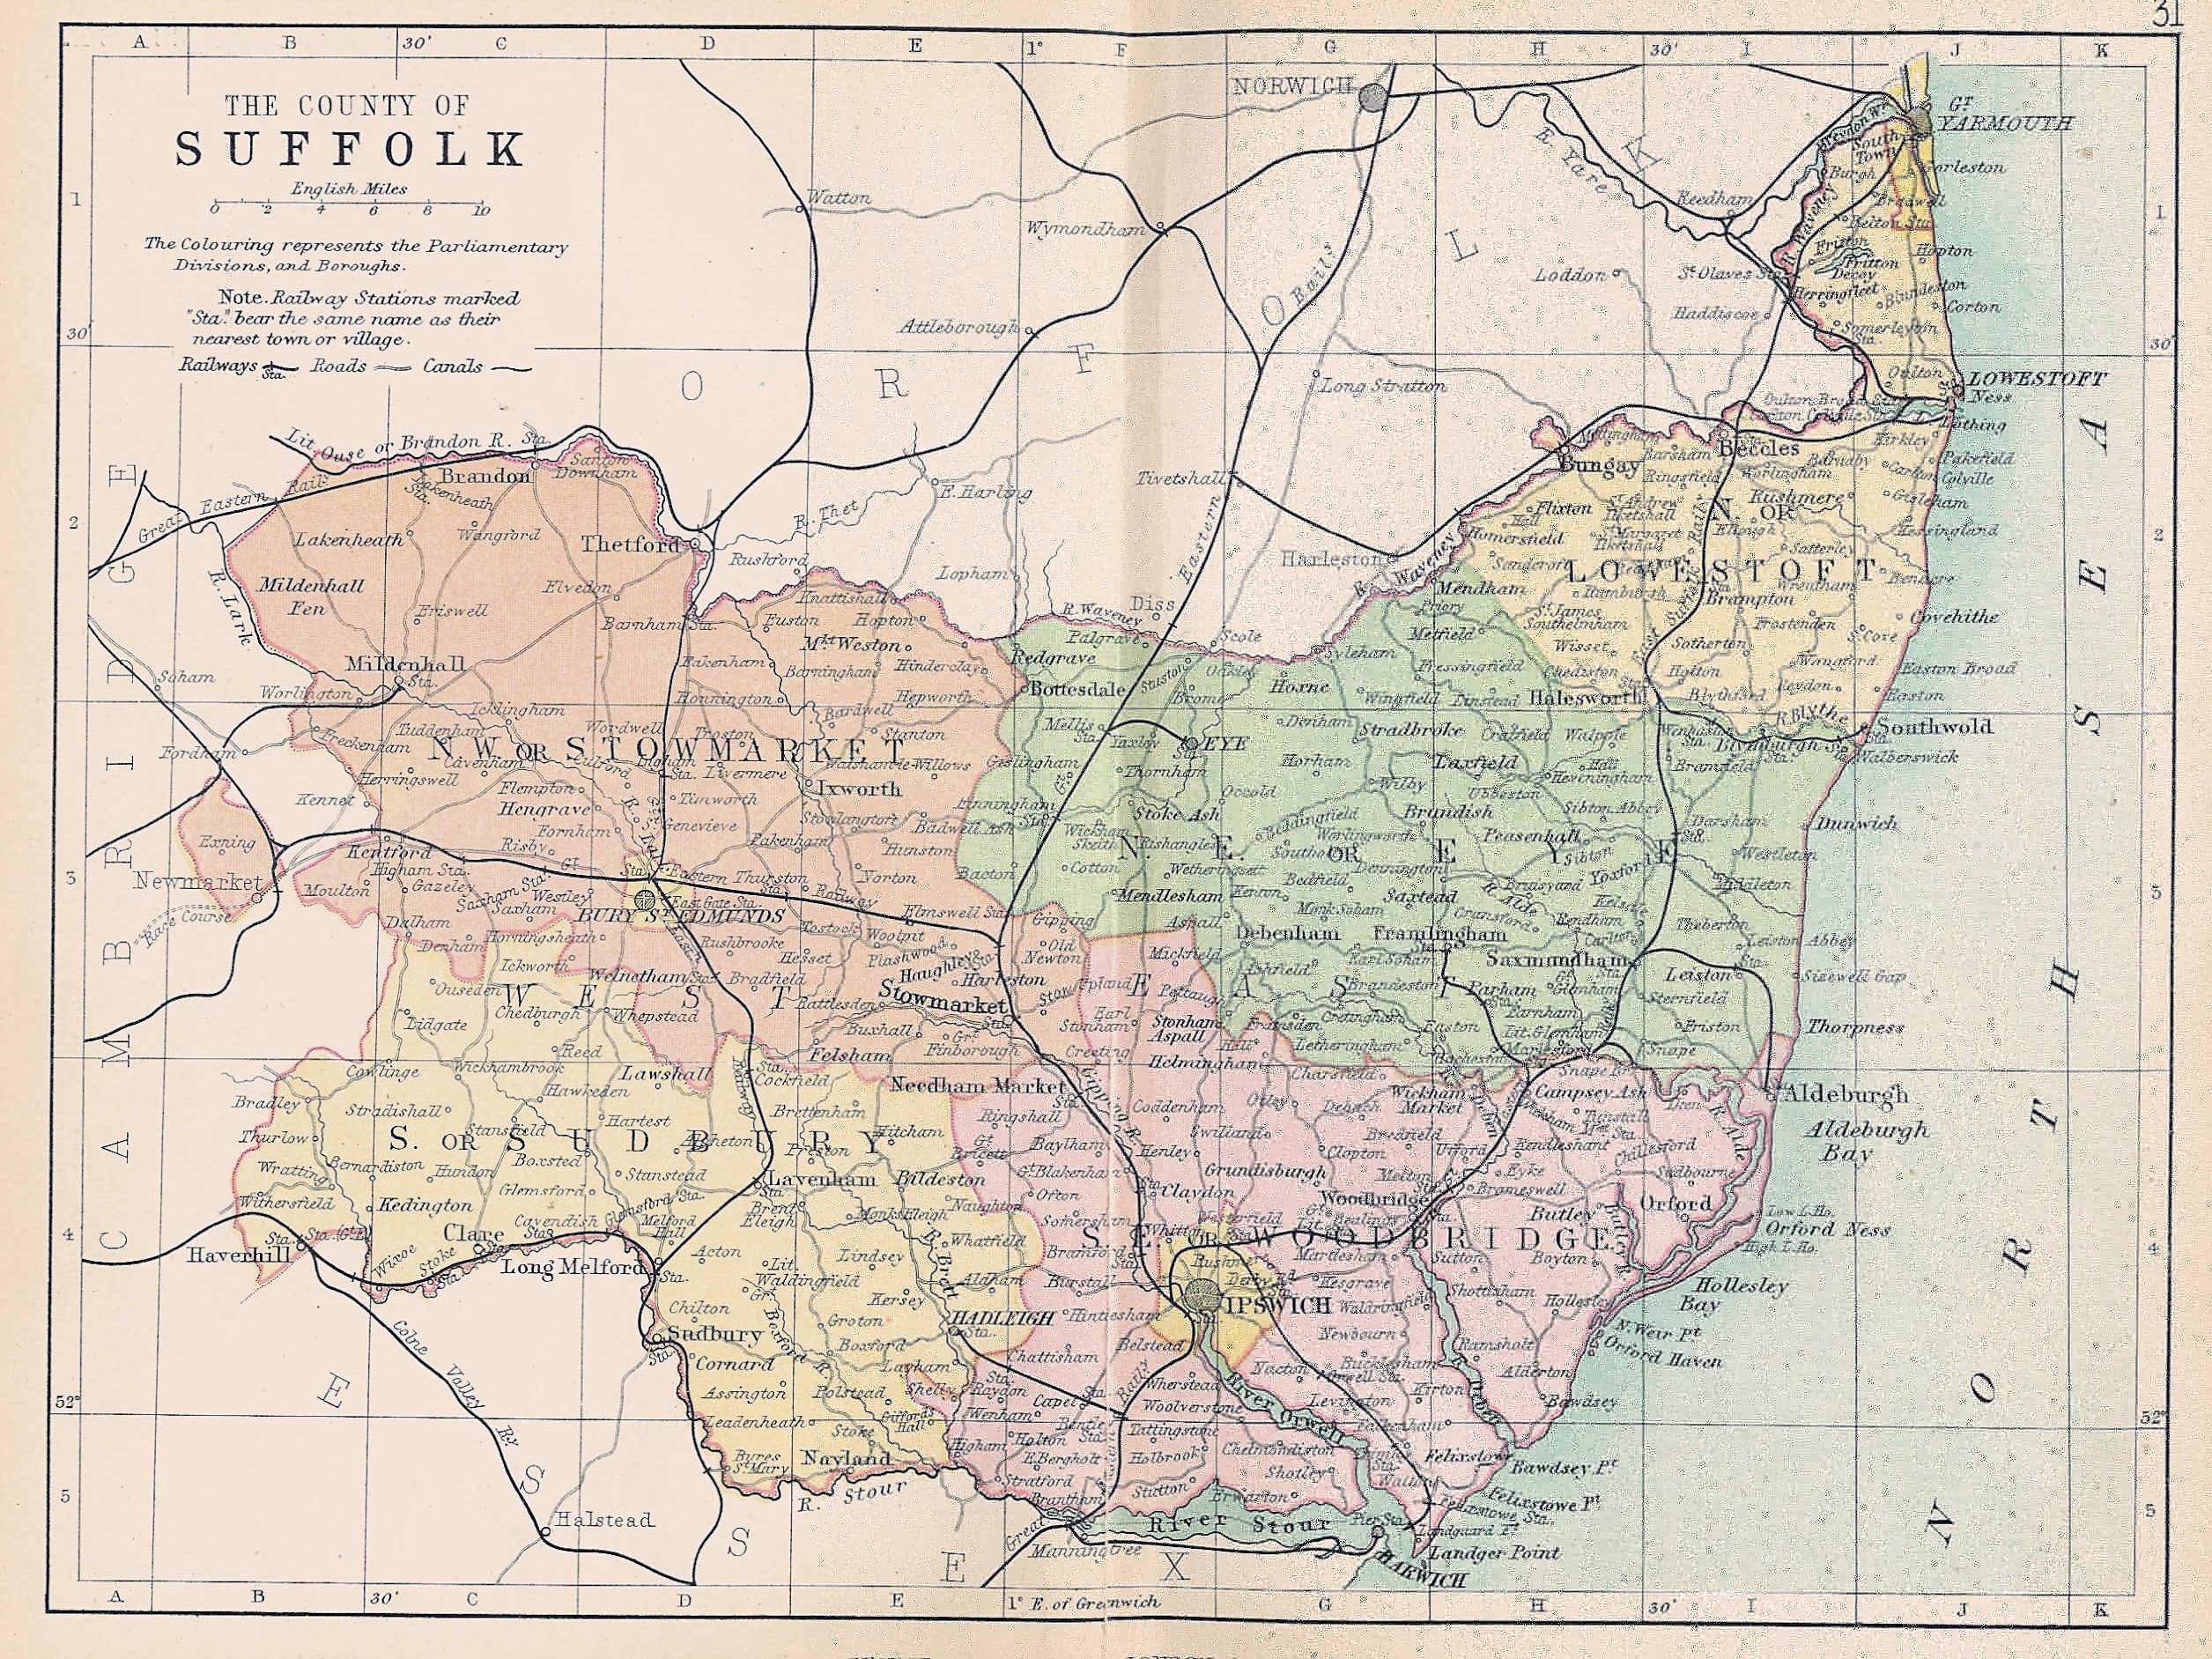 County of Suffolk [map showing] the Parliamentary Divisions and Boroughs (1910)